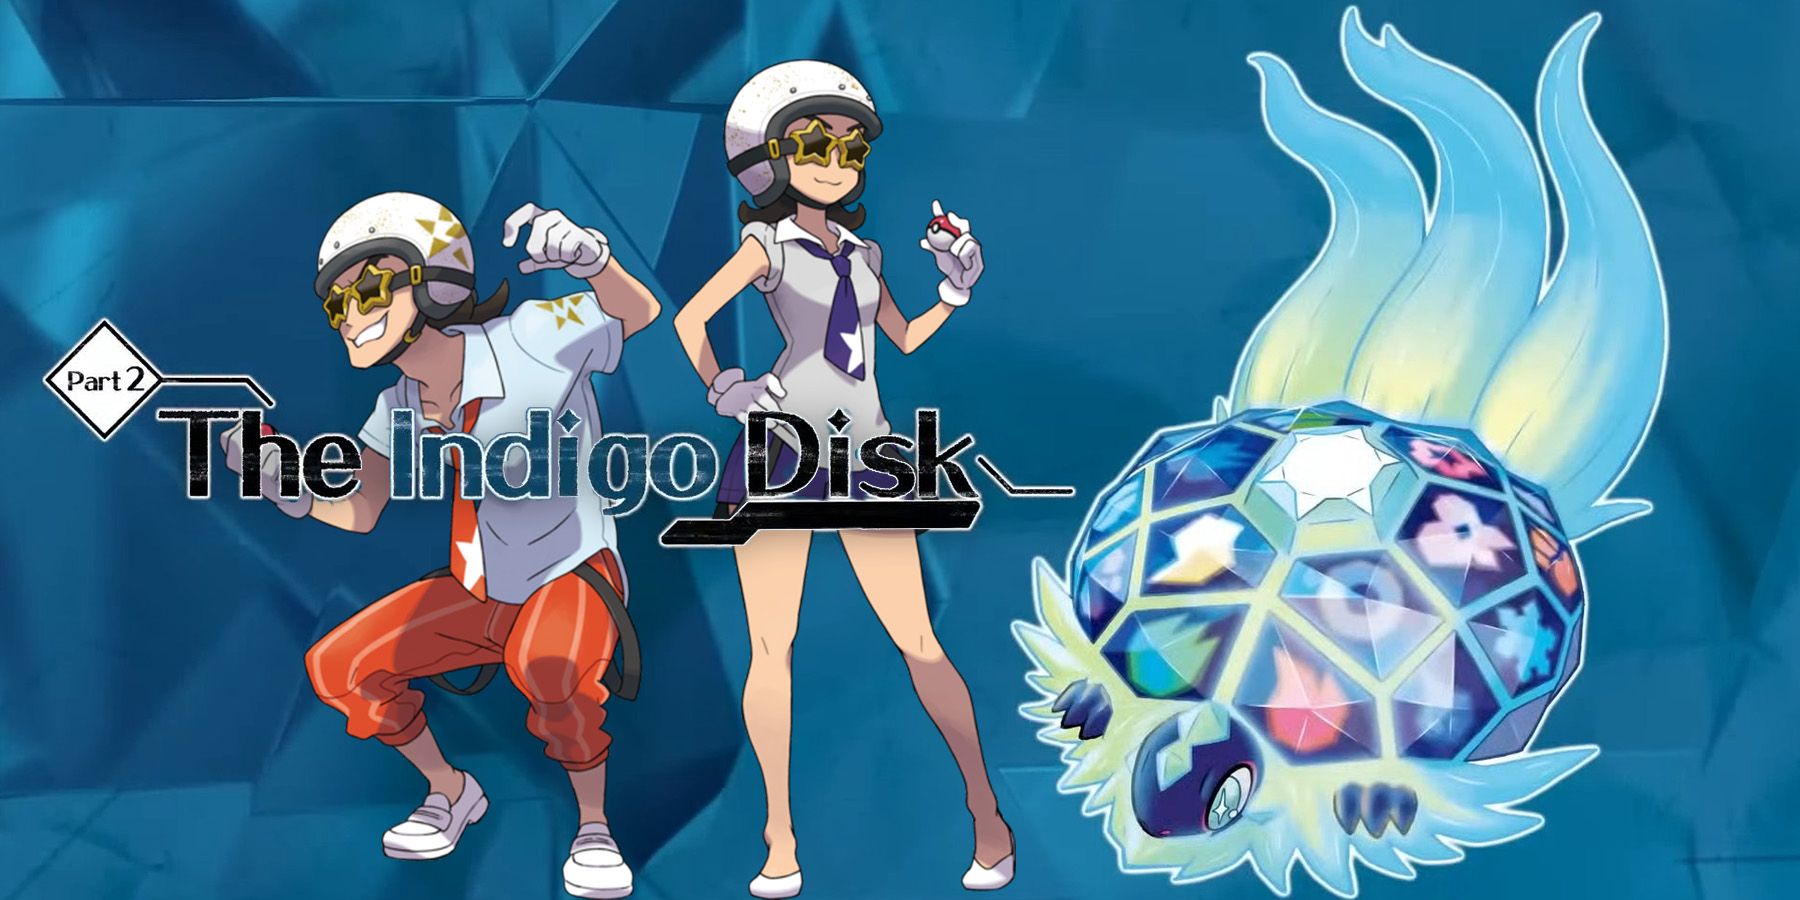 Pokemon Scarlet and Violet’s Indigo Disk DLC could be a perfect showcase for this Team Star member